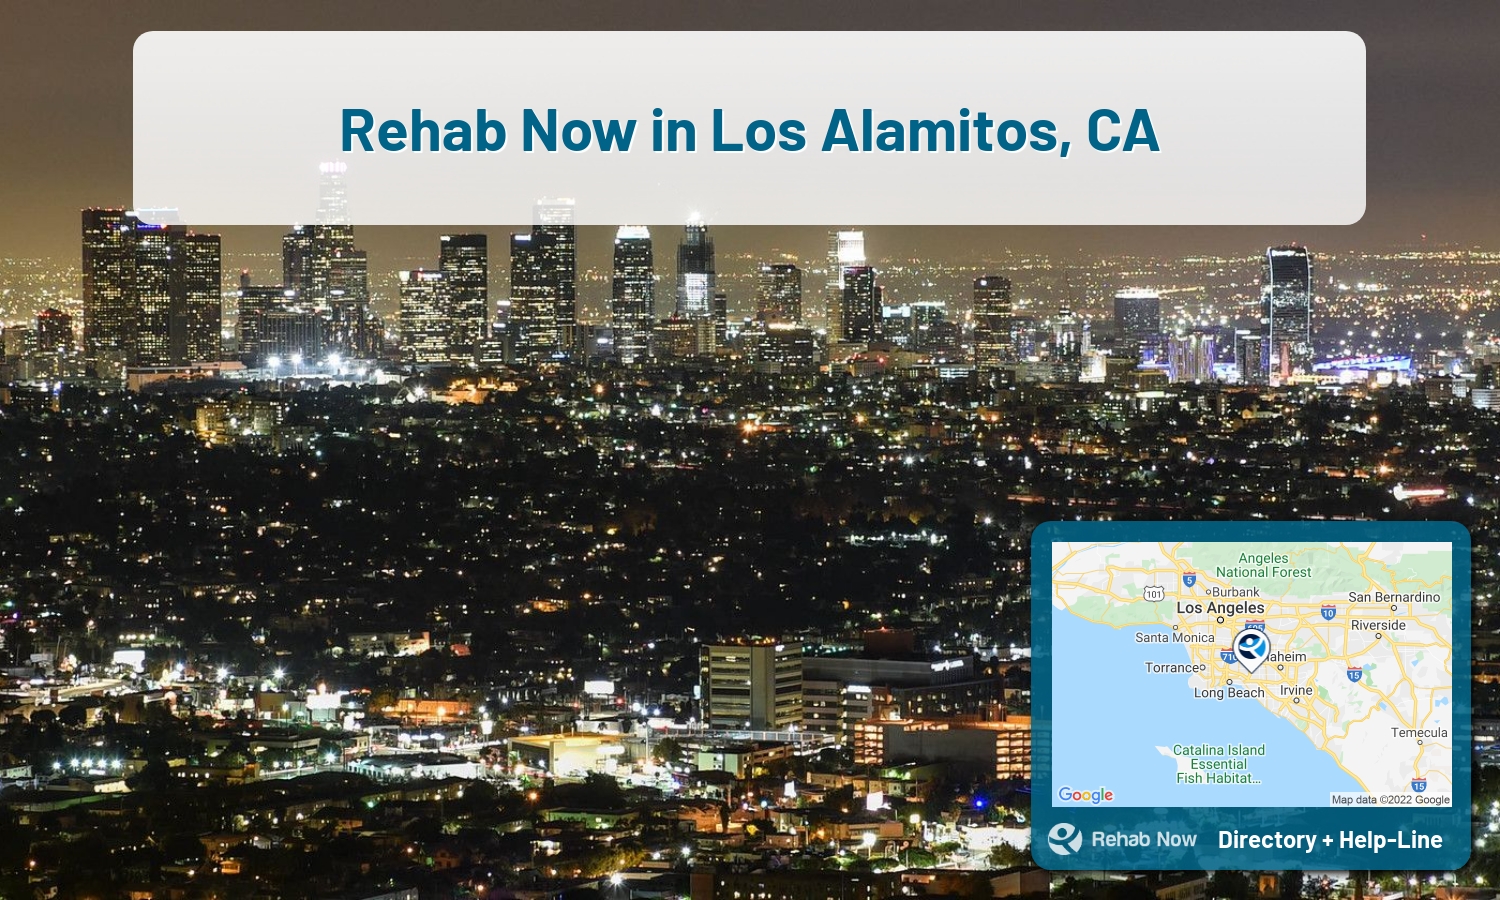 Los Alamitos, CA Treatment Centers. Find drug rehab in Los Alamitos, California, or detox and treatment programs. Get the right help now!